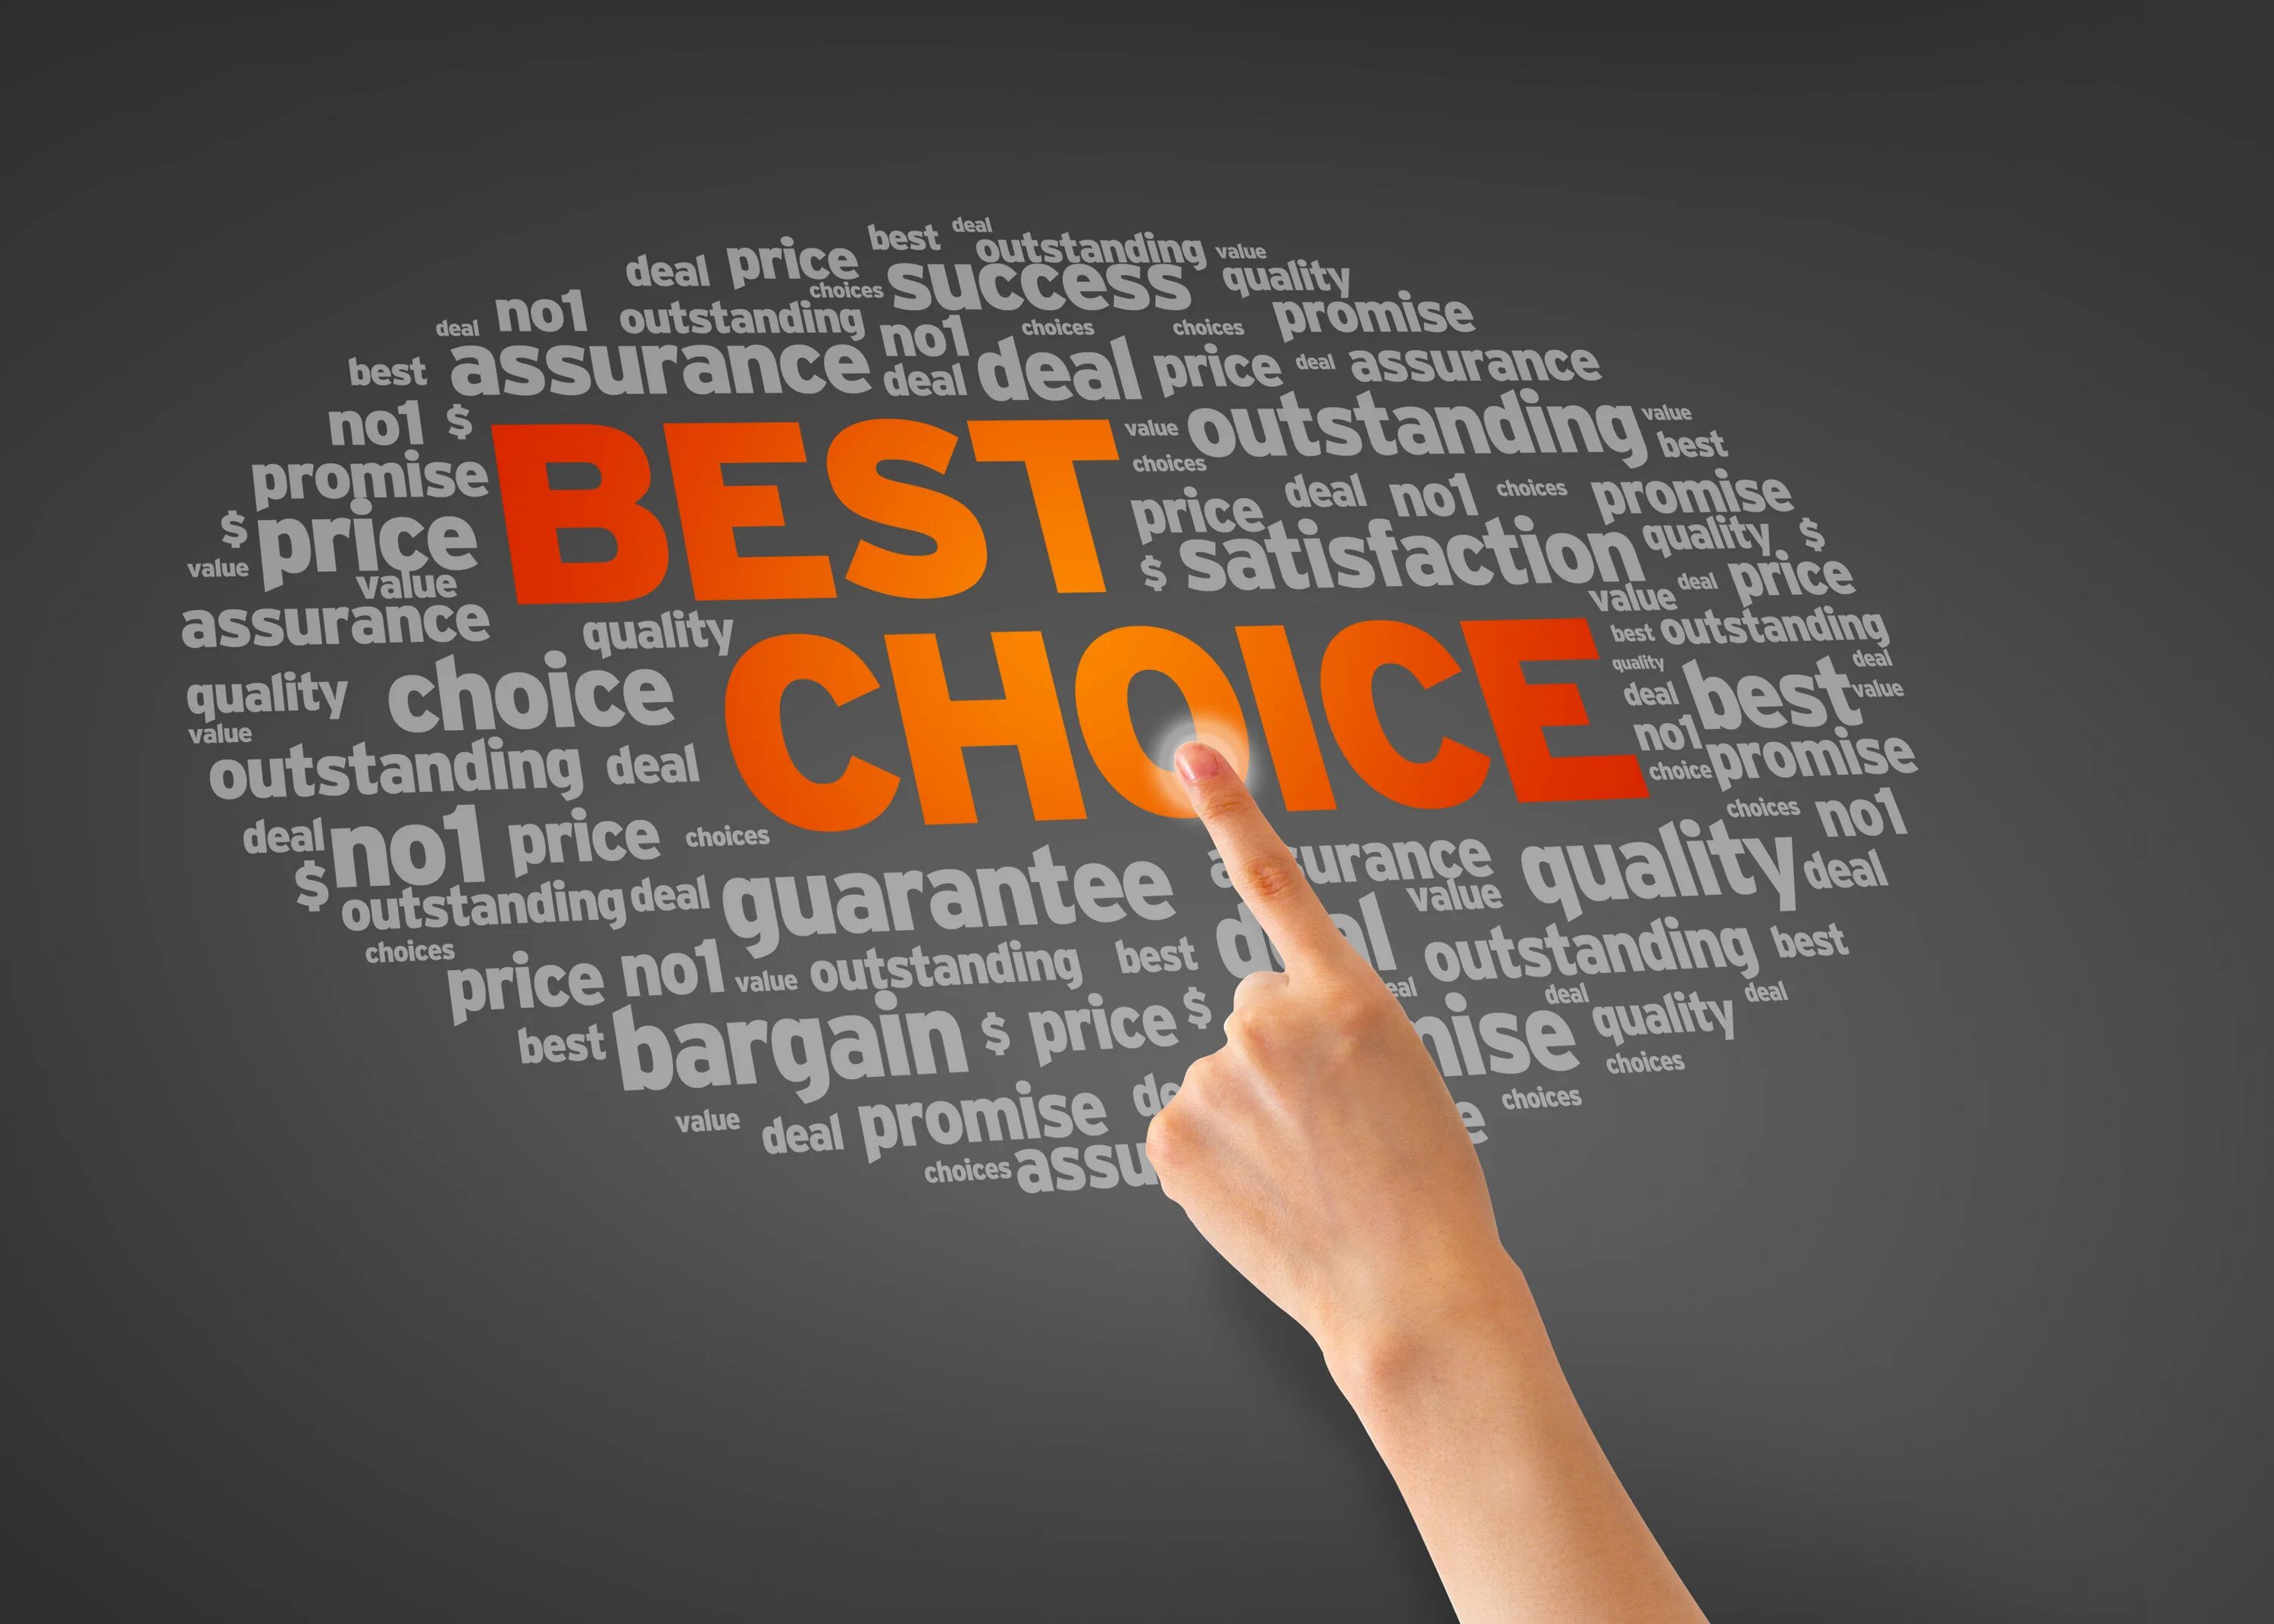 The best choice. Choice картинки. Картинка good choice. Значок best choice. Price deals